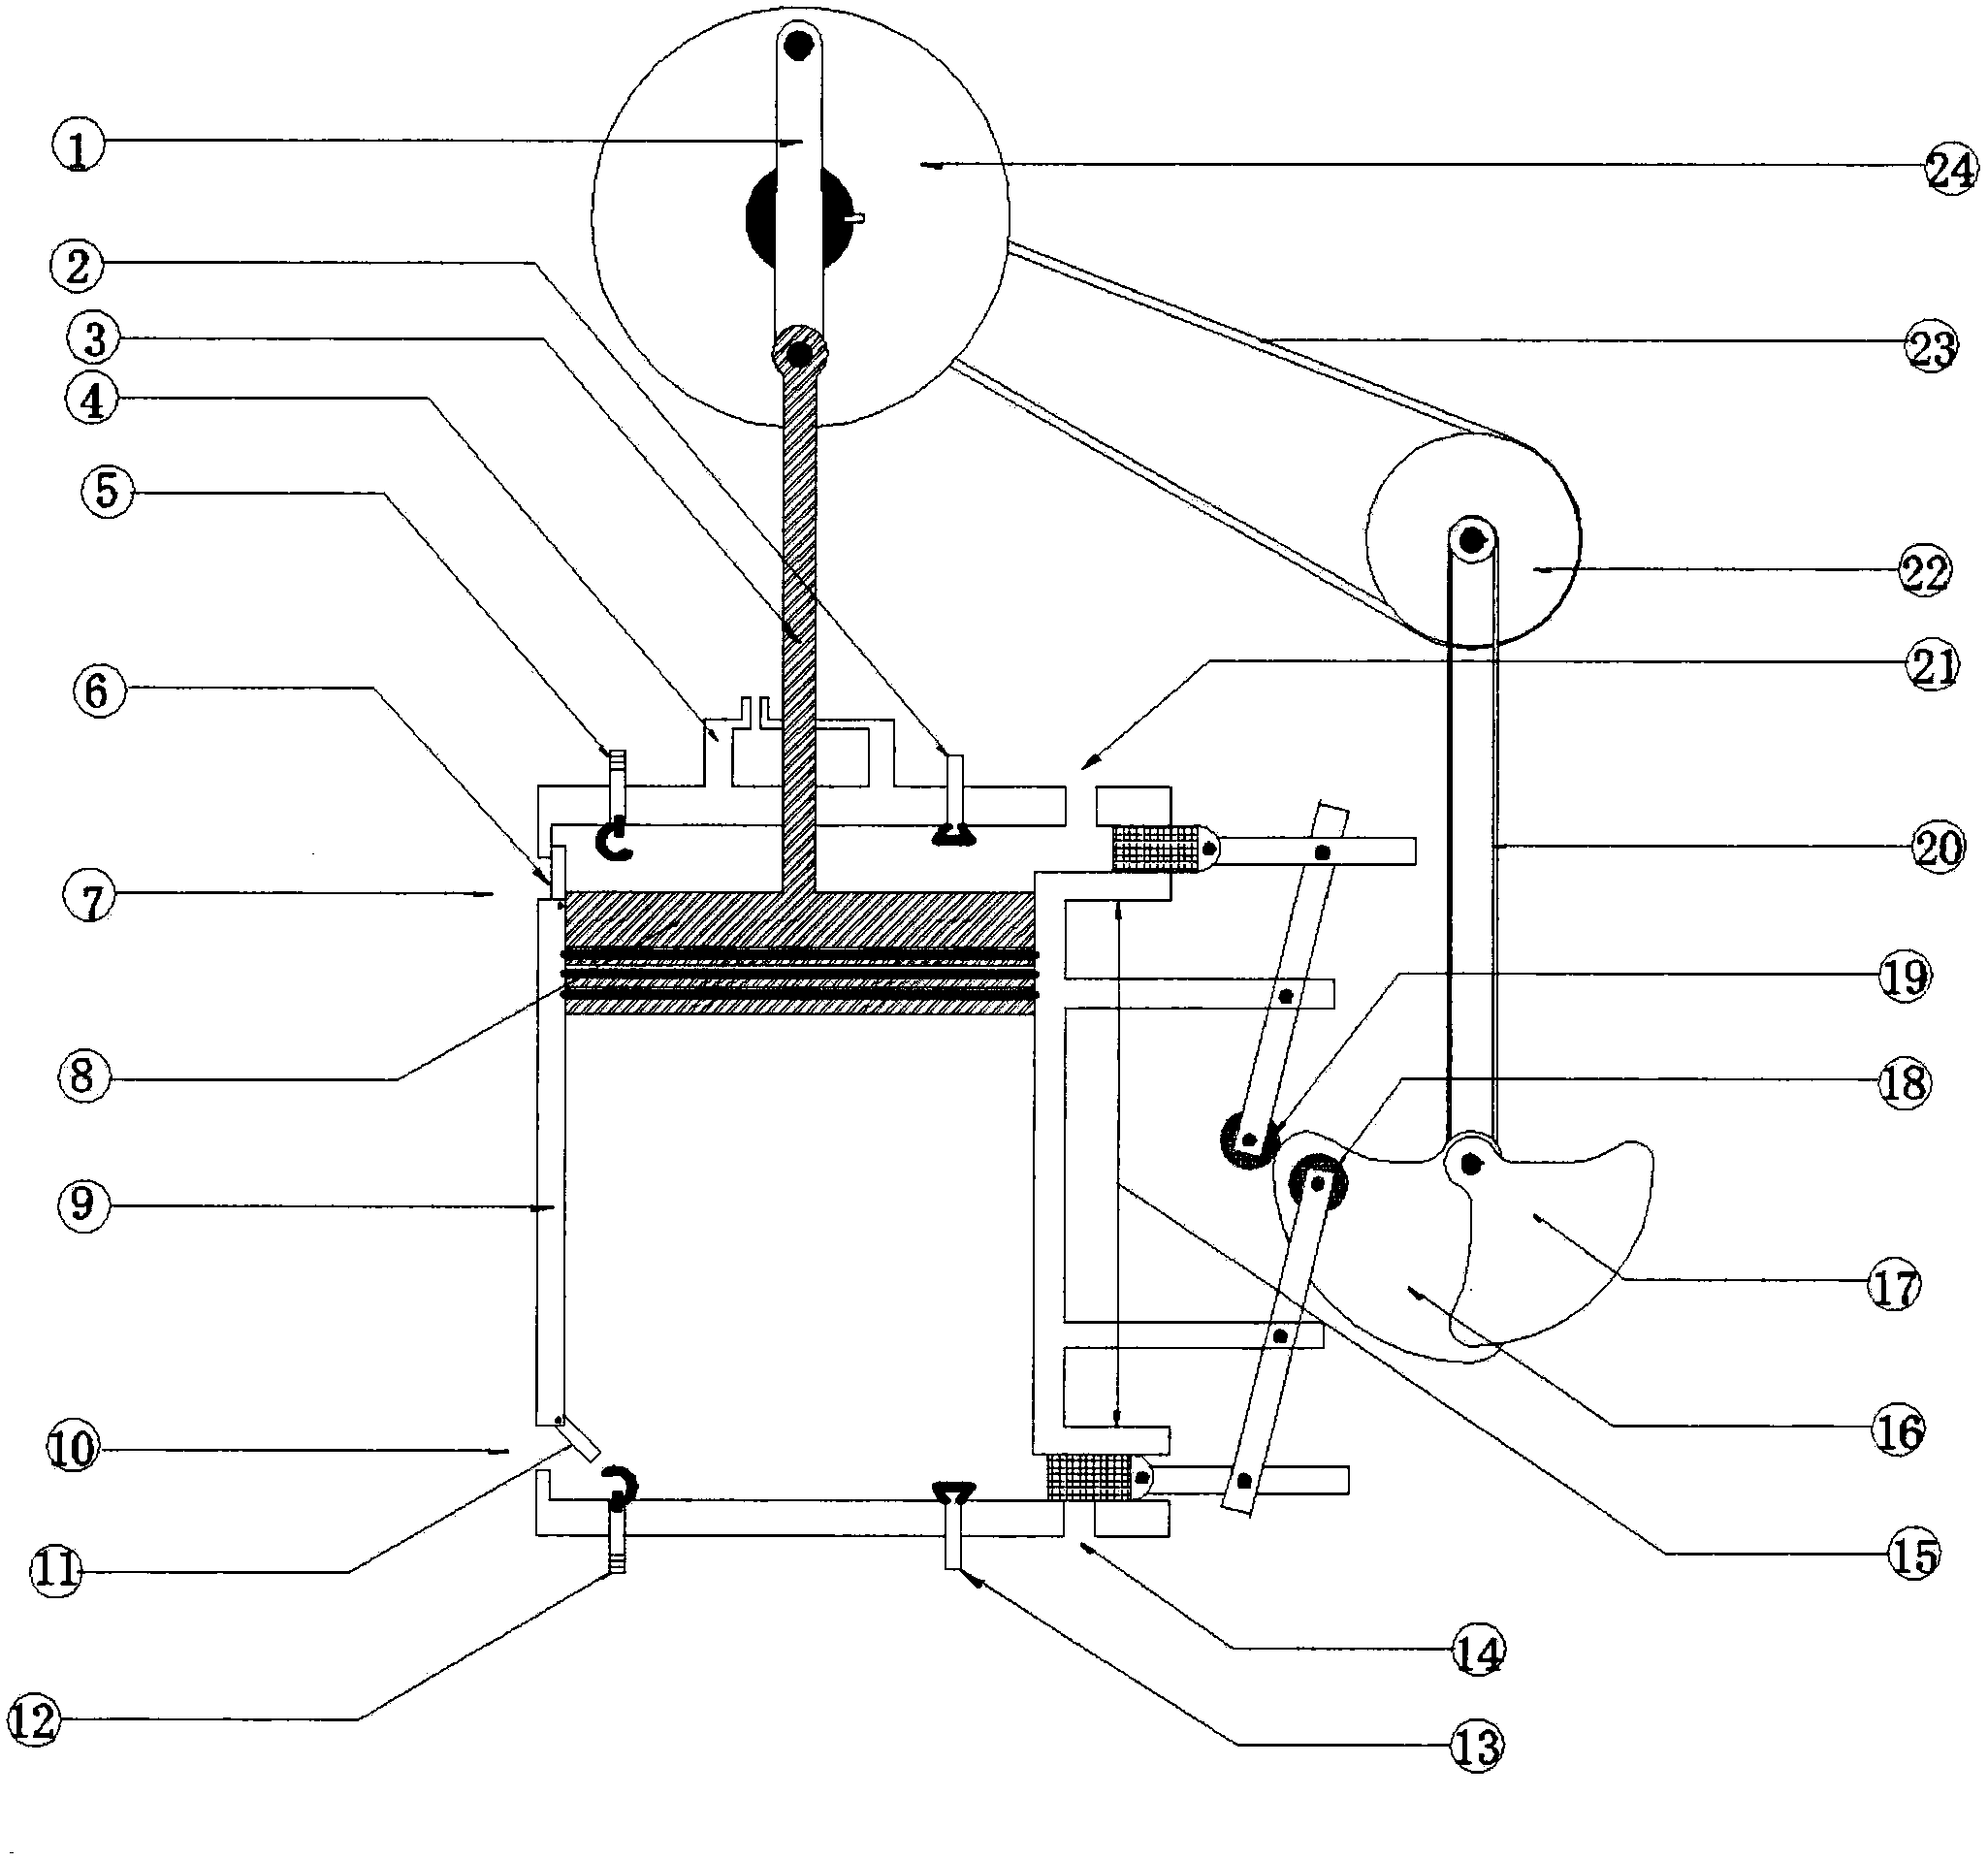 Multi-cycle internal combustion engine